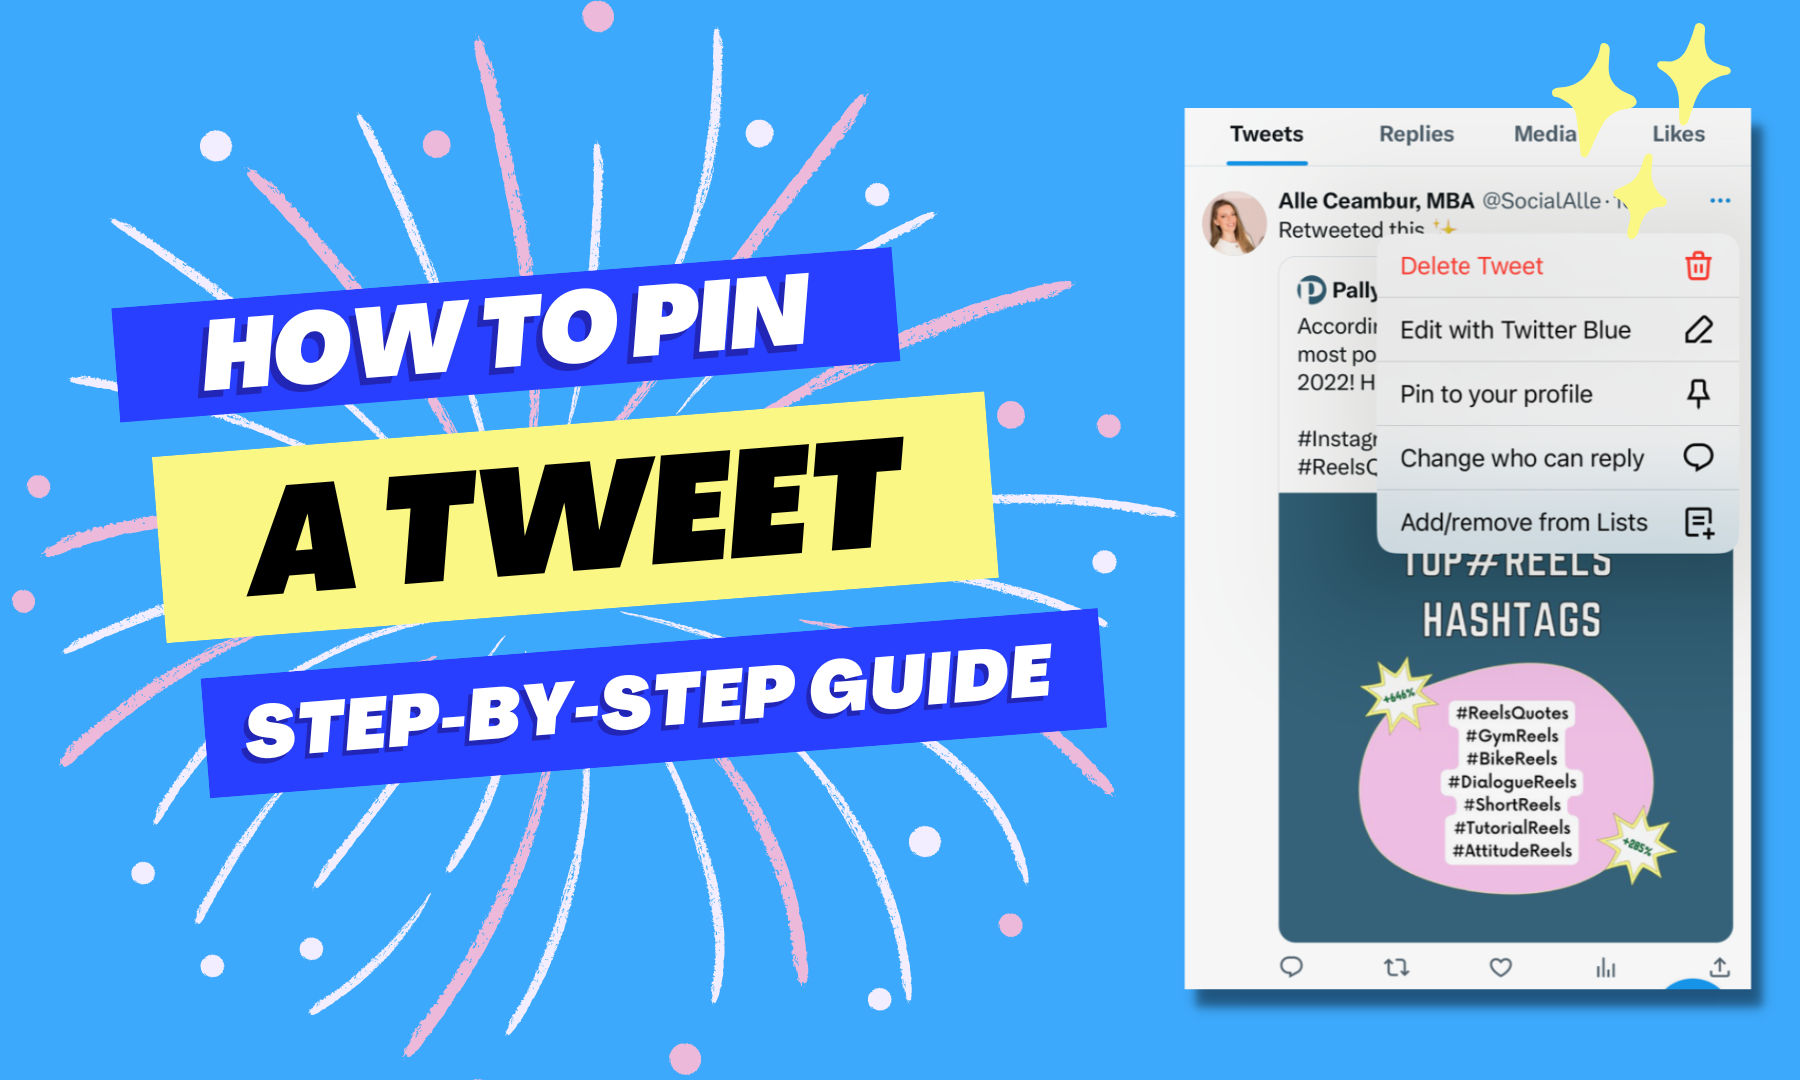 How to Pin a Tweet on Twitter: A Step-by-Step Guide